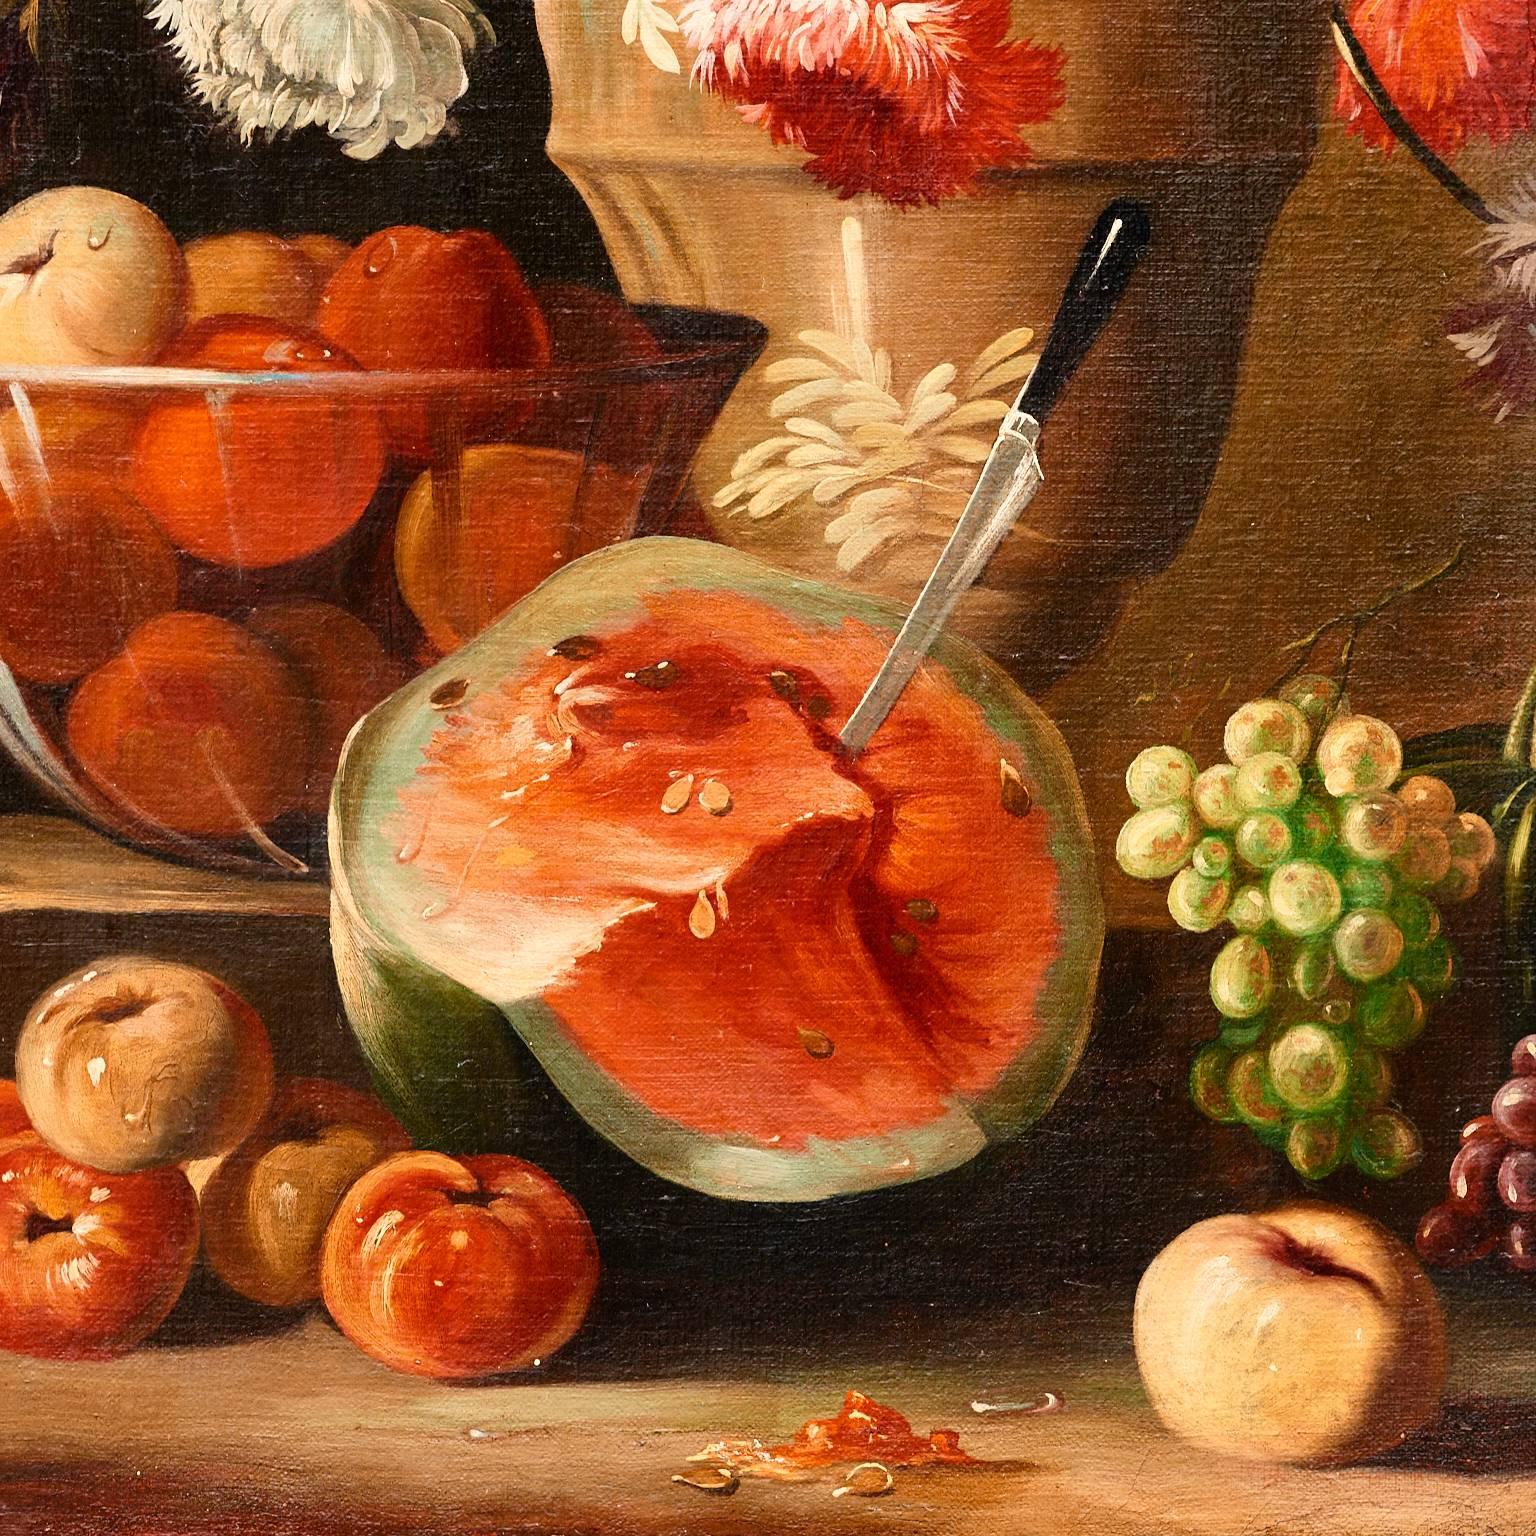 This handsome still life in the tradition of the 17th century masters, depicts beautifully executed poppies, melons, grapes, and apples, on a stone ledge with a dramatic watermelon and a knife embedded in the fruit. It hangs in a black frame of the